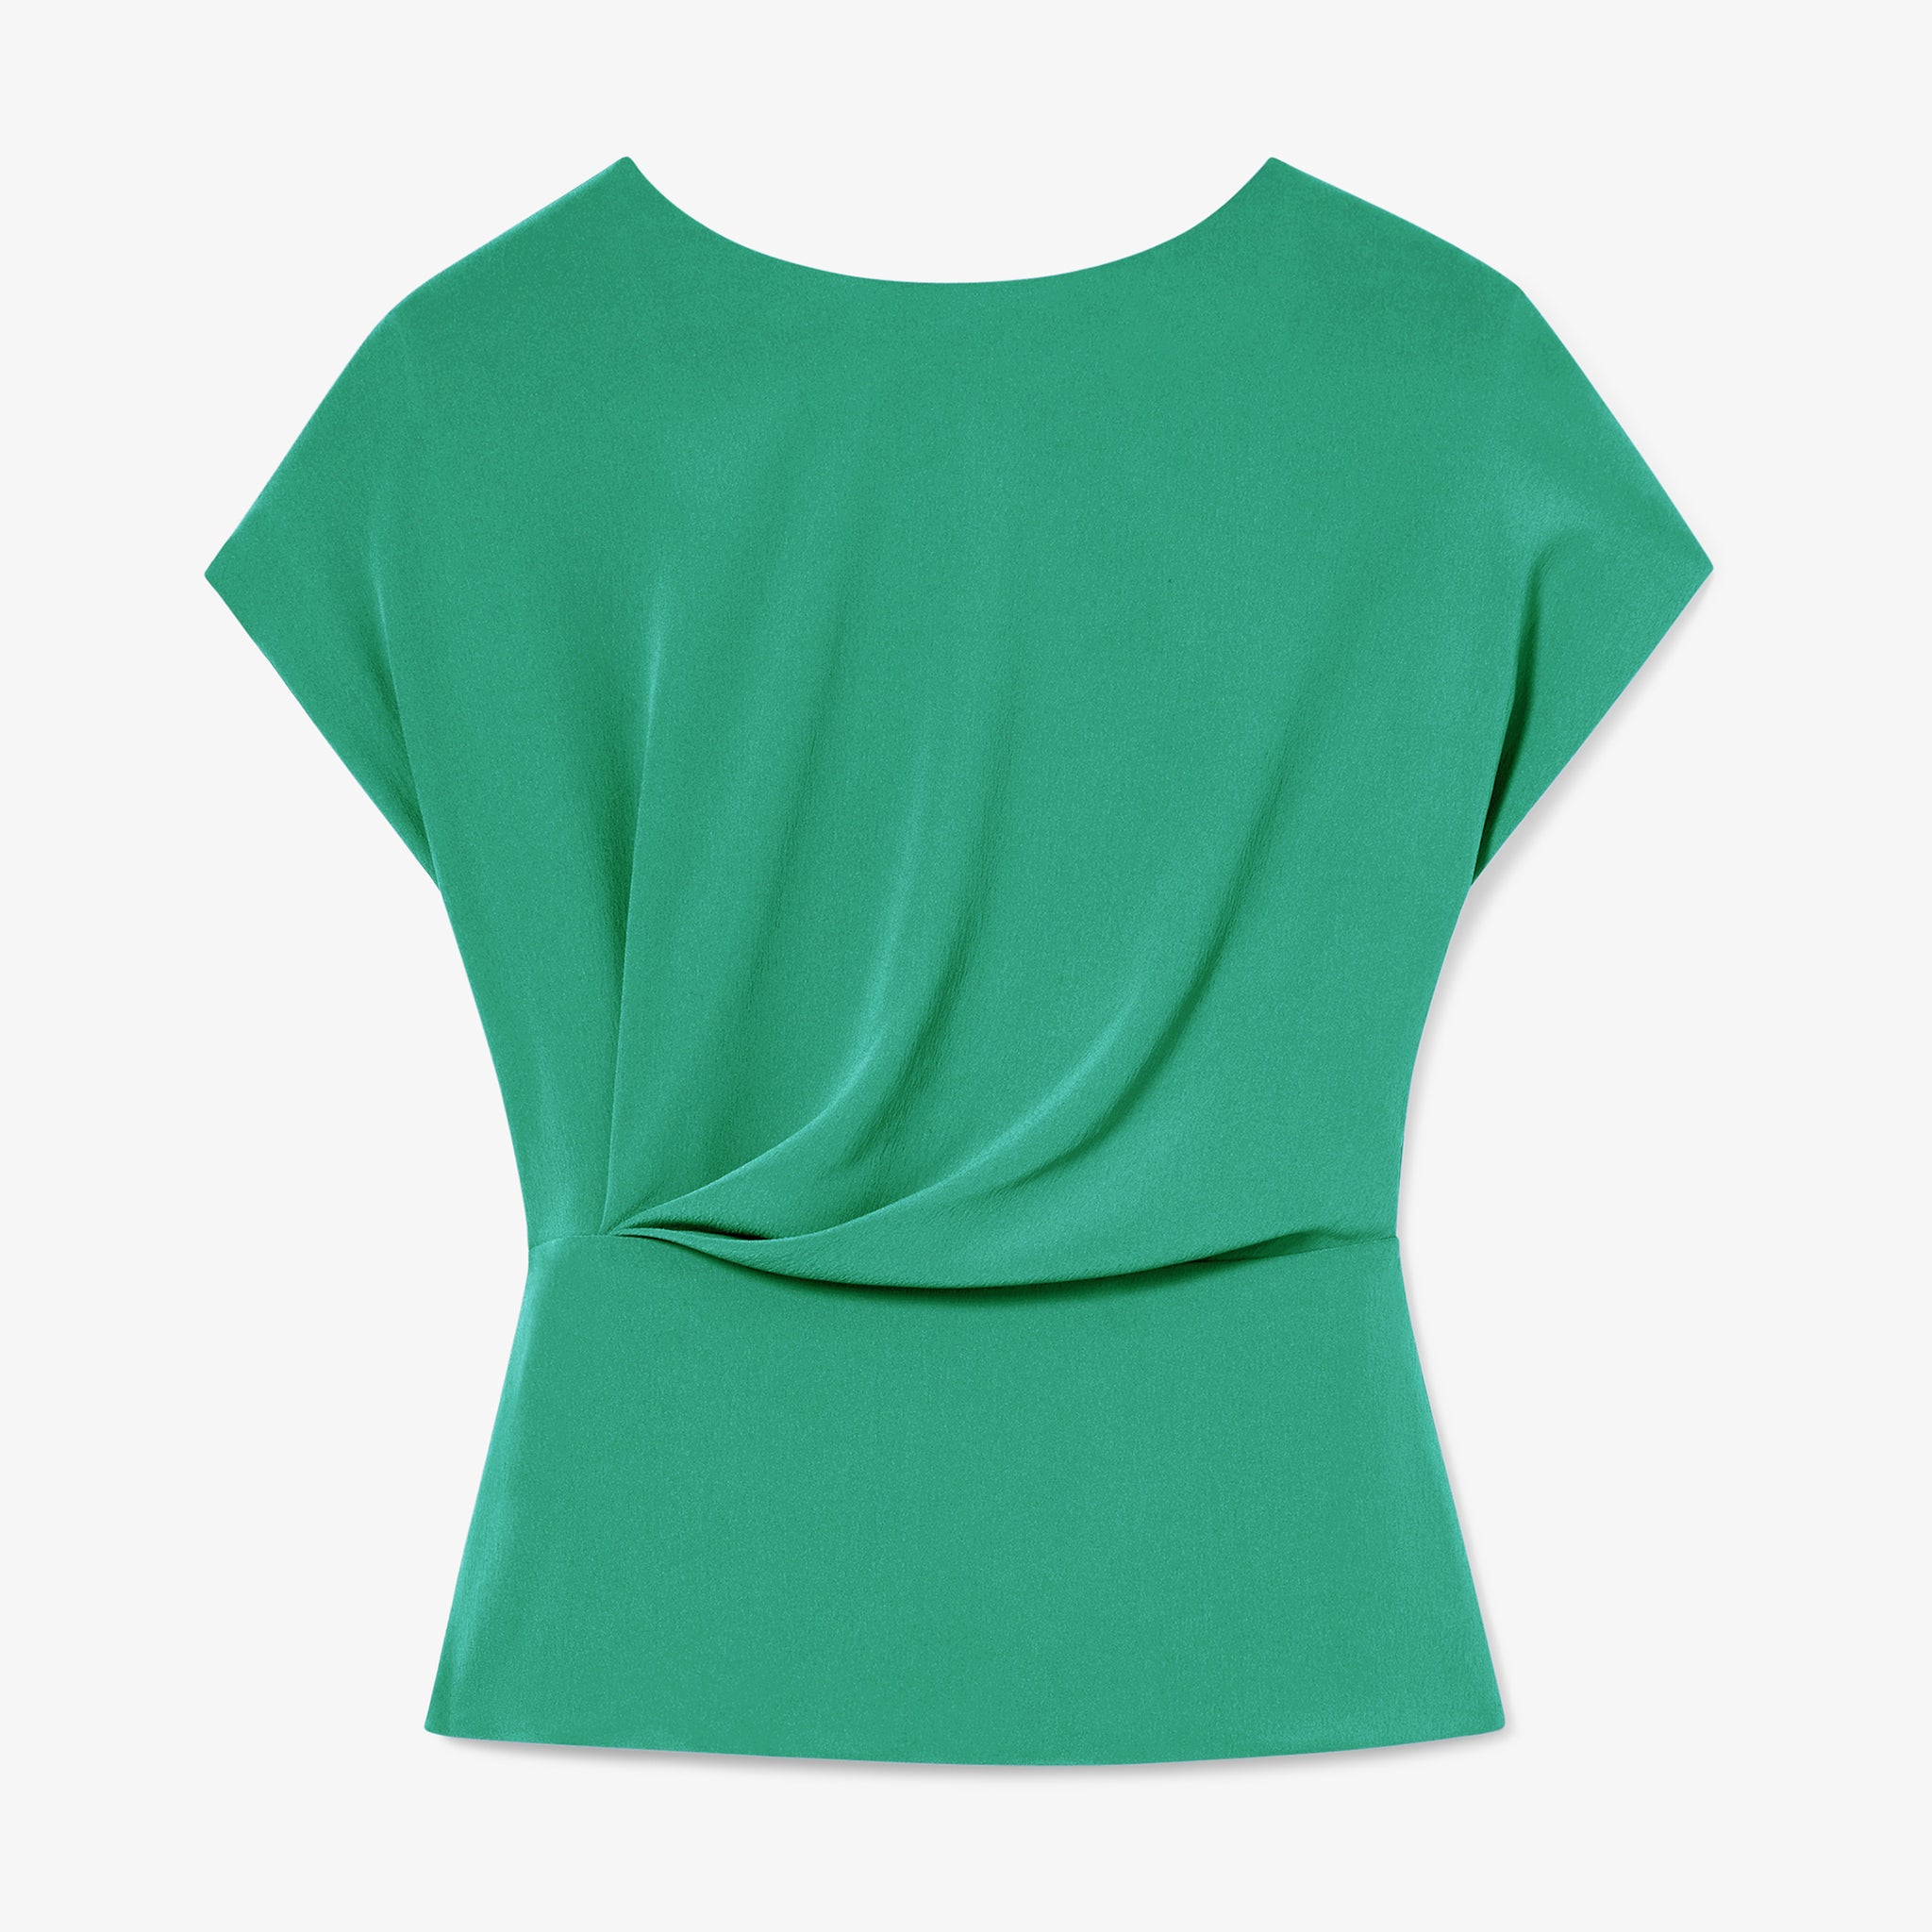 Packshot image of the nora top in clover 